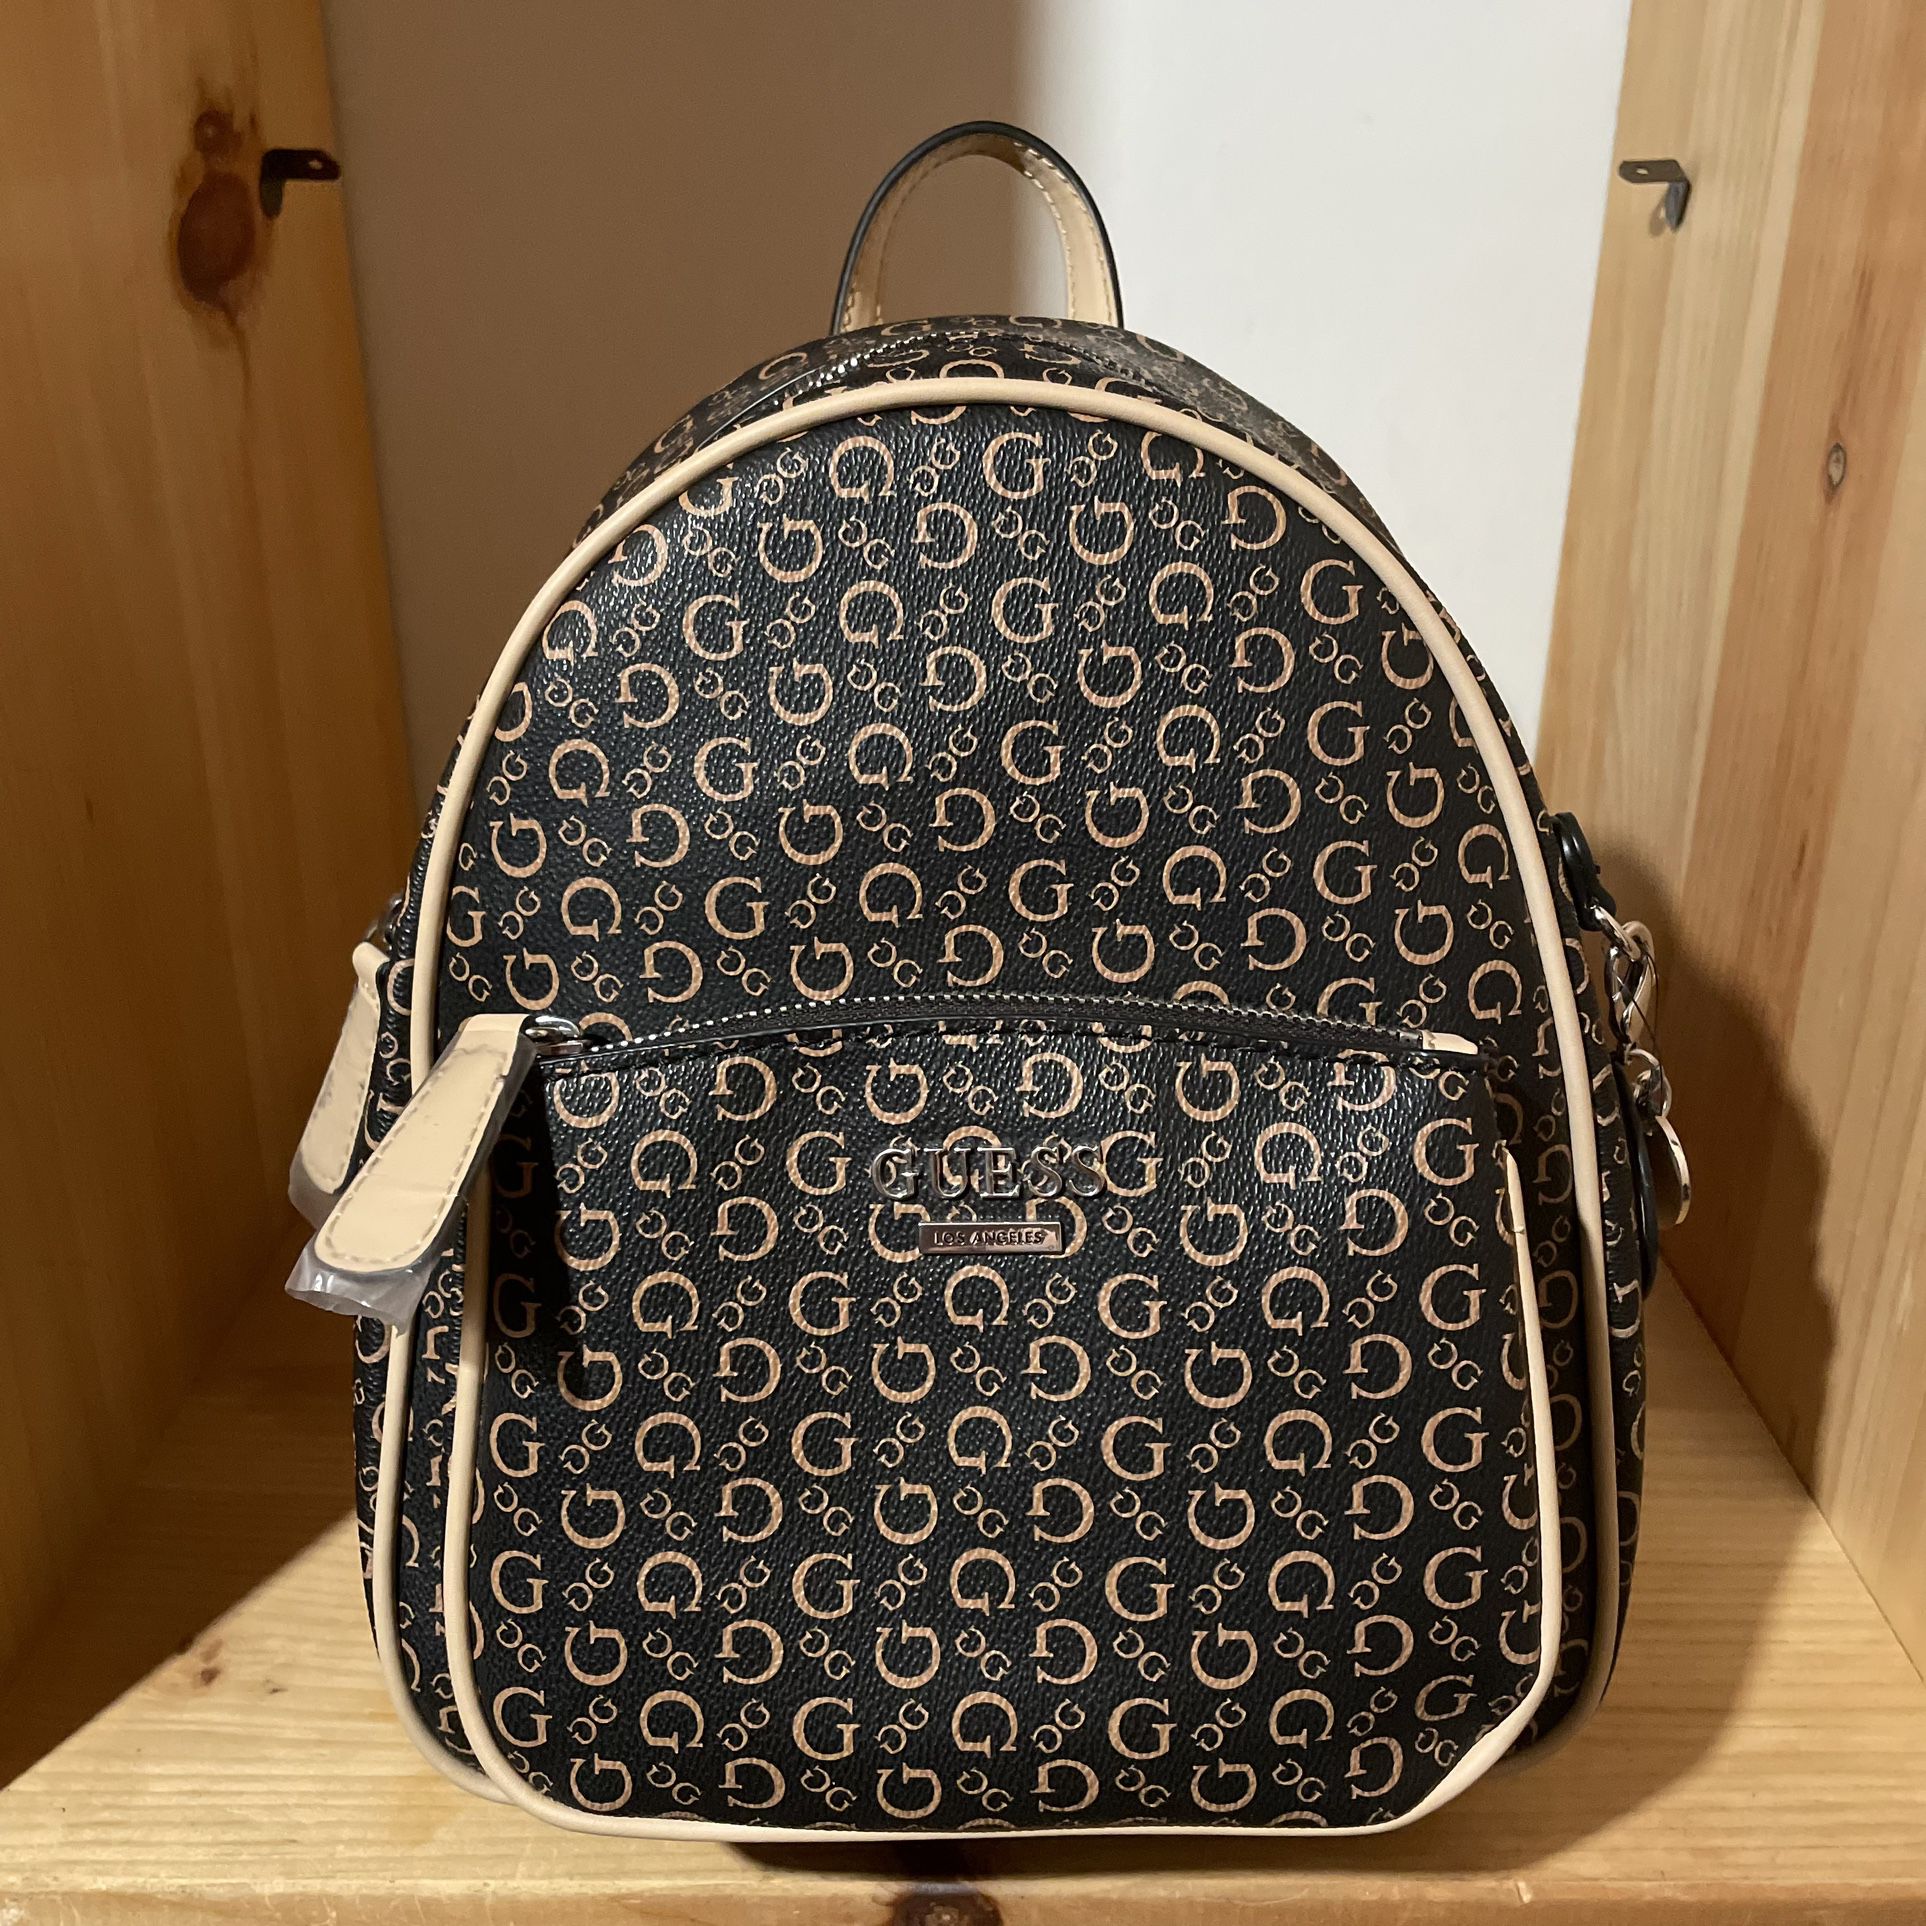 GUESS backpack purse